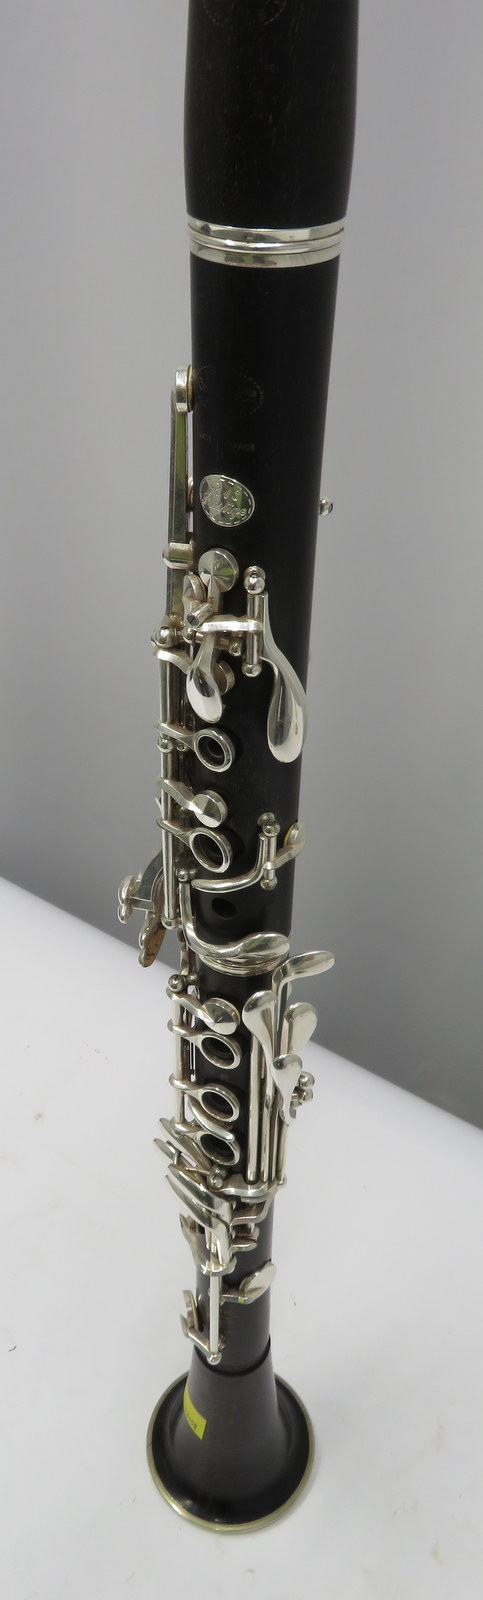 Buffet Crampon R13 Prestige clarinet with case. Serial number: 587000. - Image 5 of 20